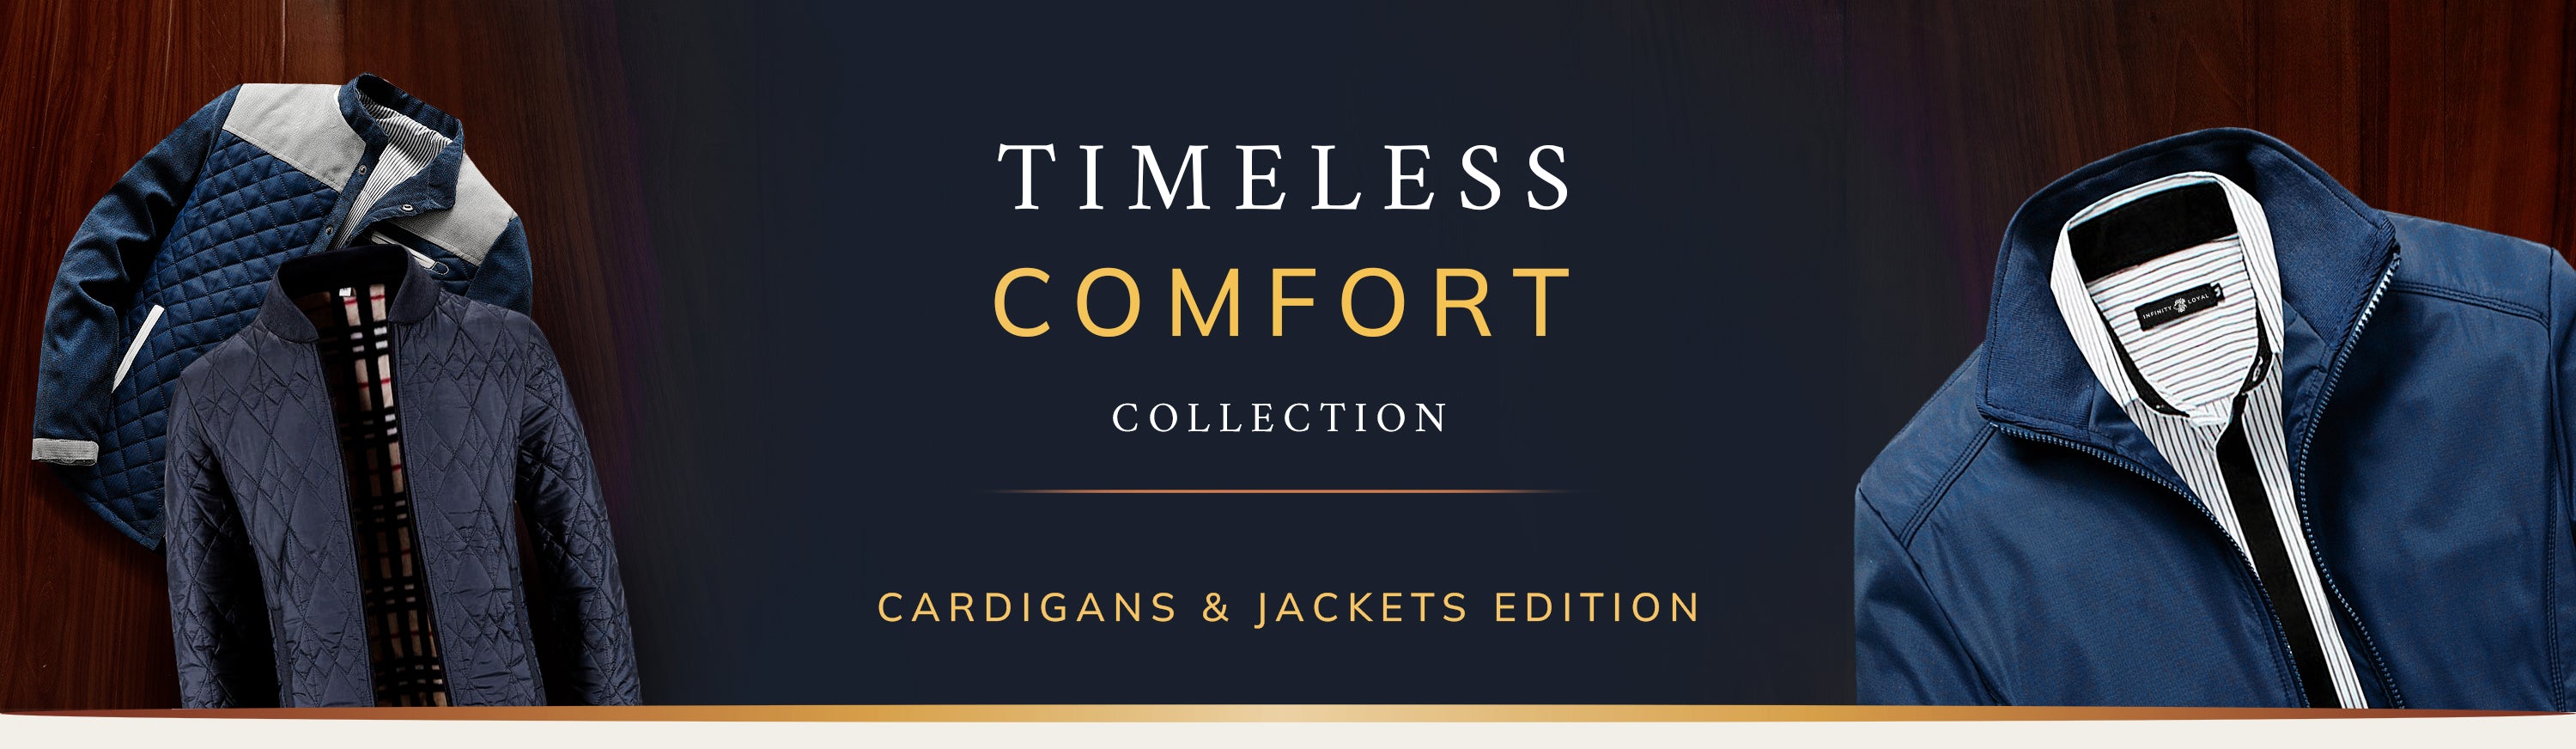 Timeless Comfort Collection banner.jpg__PID:90061673-77df-4840-903a-2cfbee3f2eb0